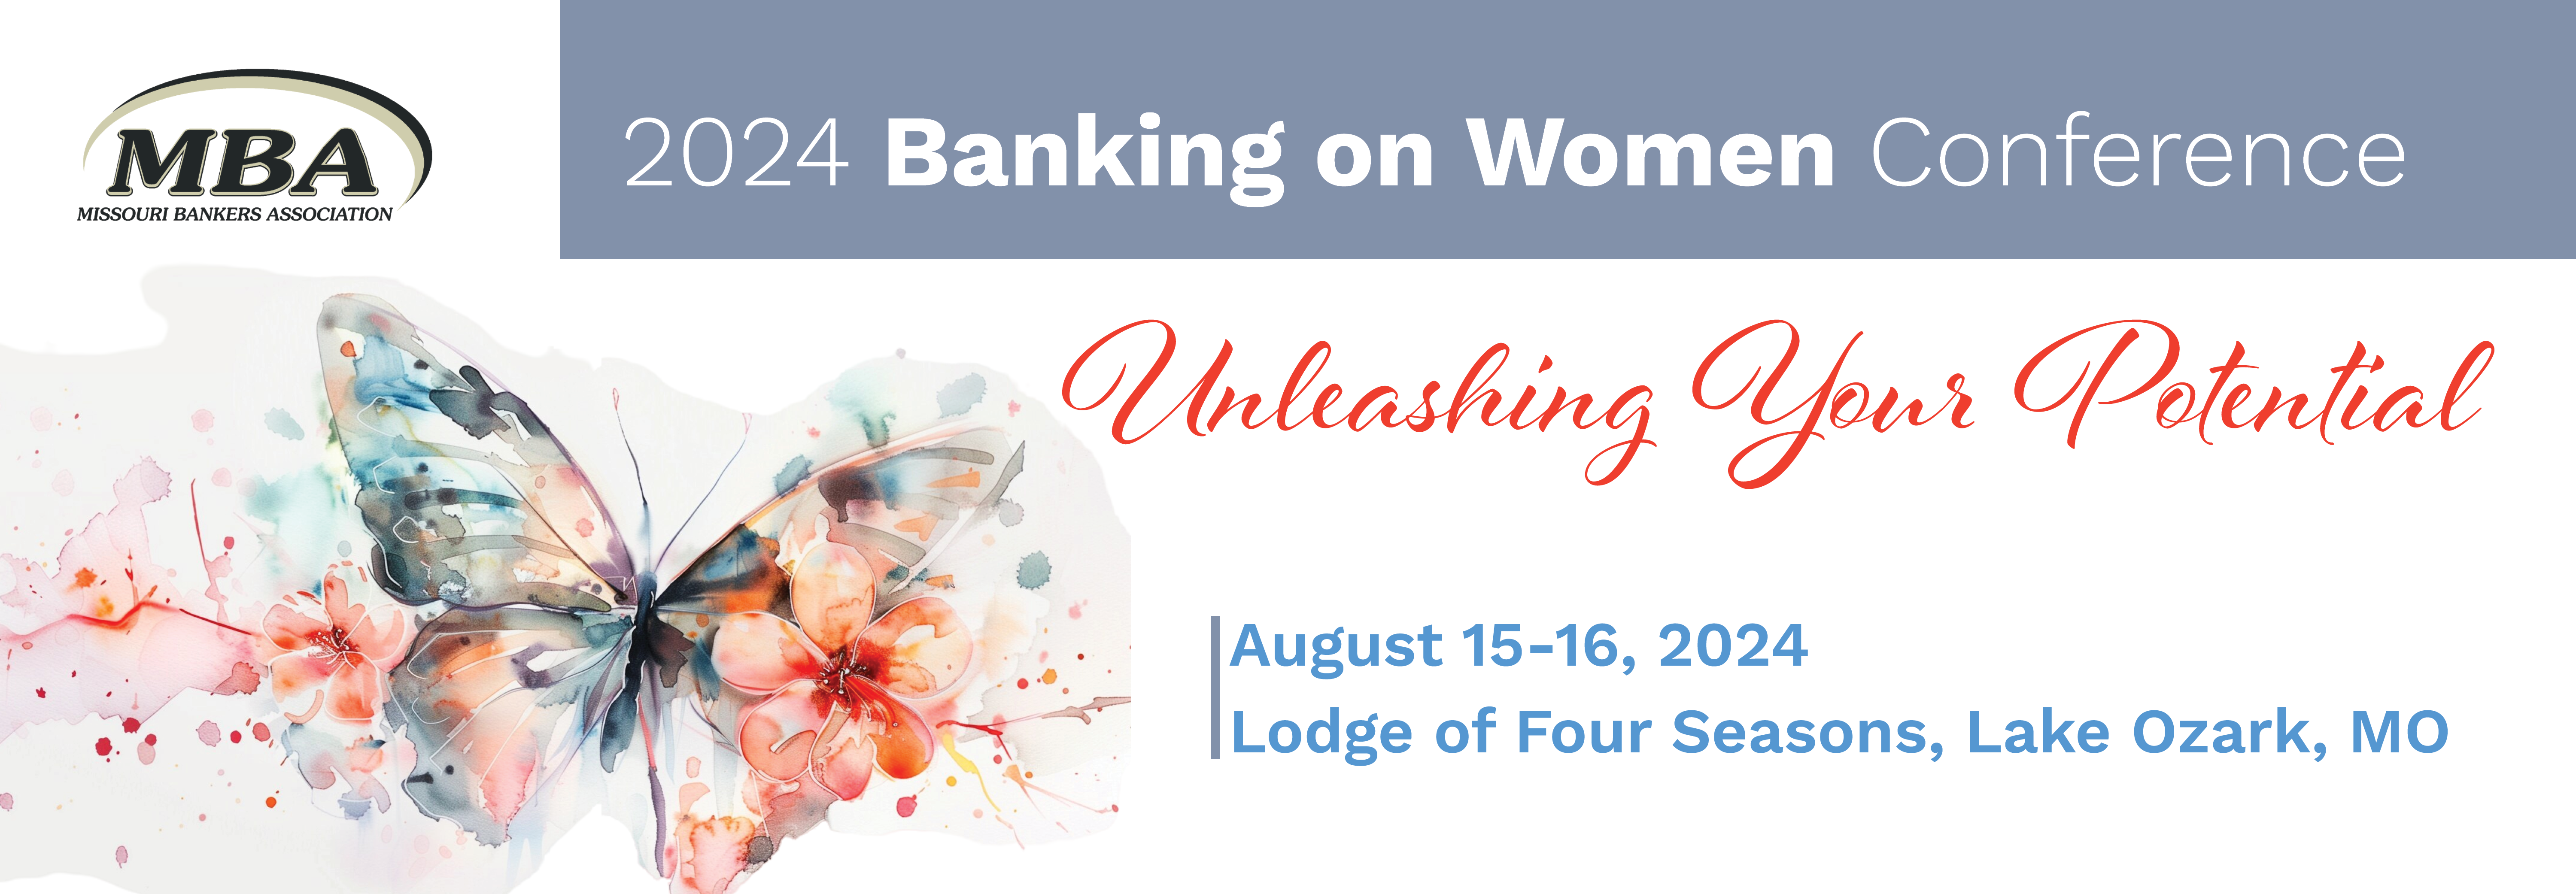 Banking on Women Conference - August 2024